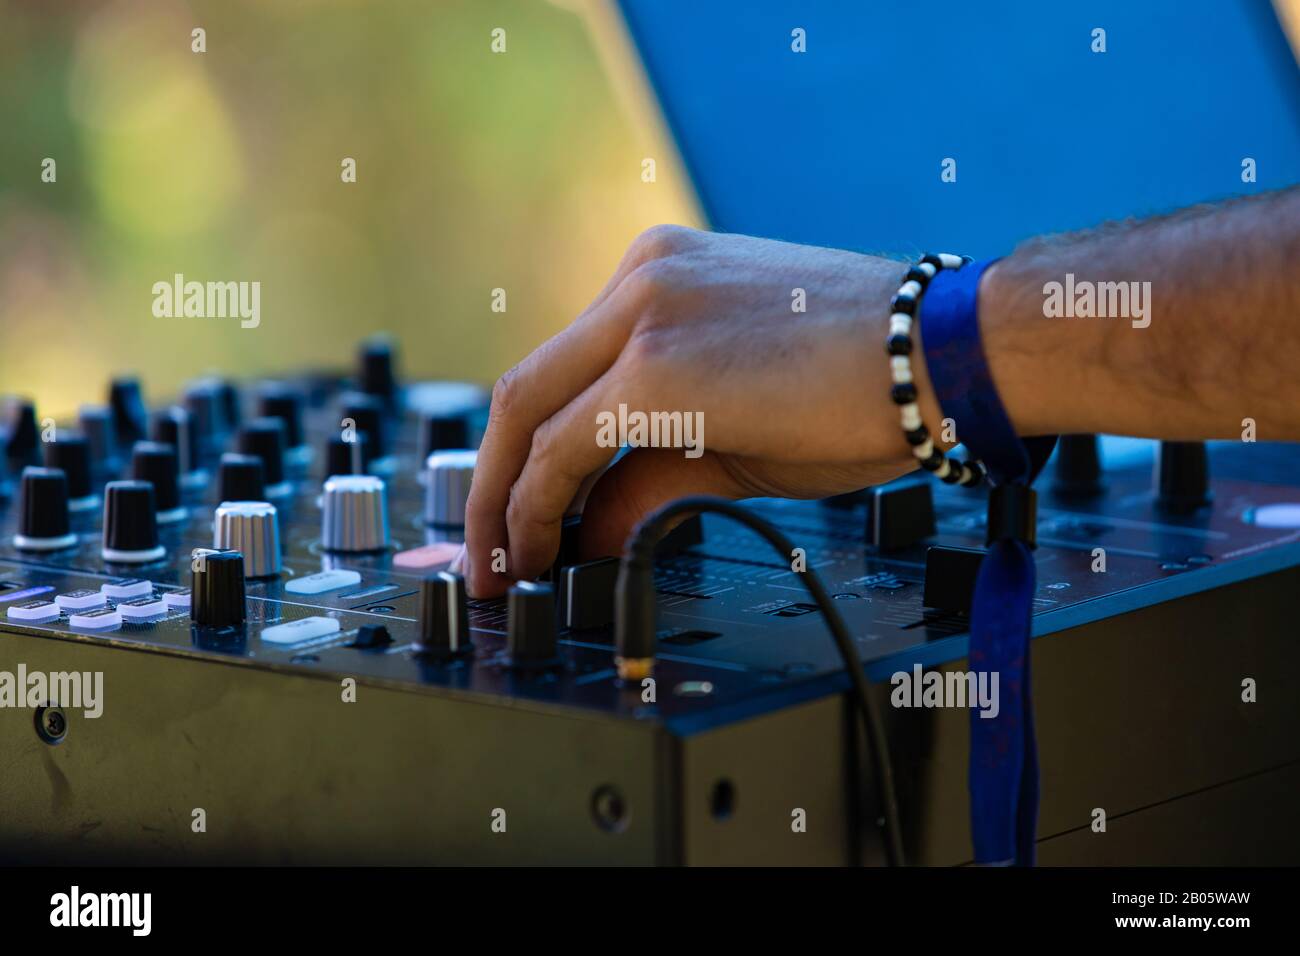 A close up view on the hand of an electronic music DJ turning dials on a CDJ mixer, wearing bangles against green blurry background at earth festival Stock Photo